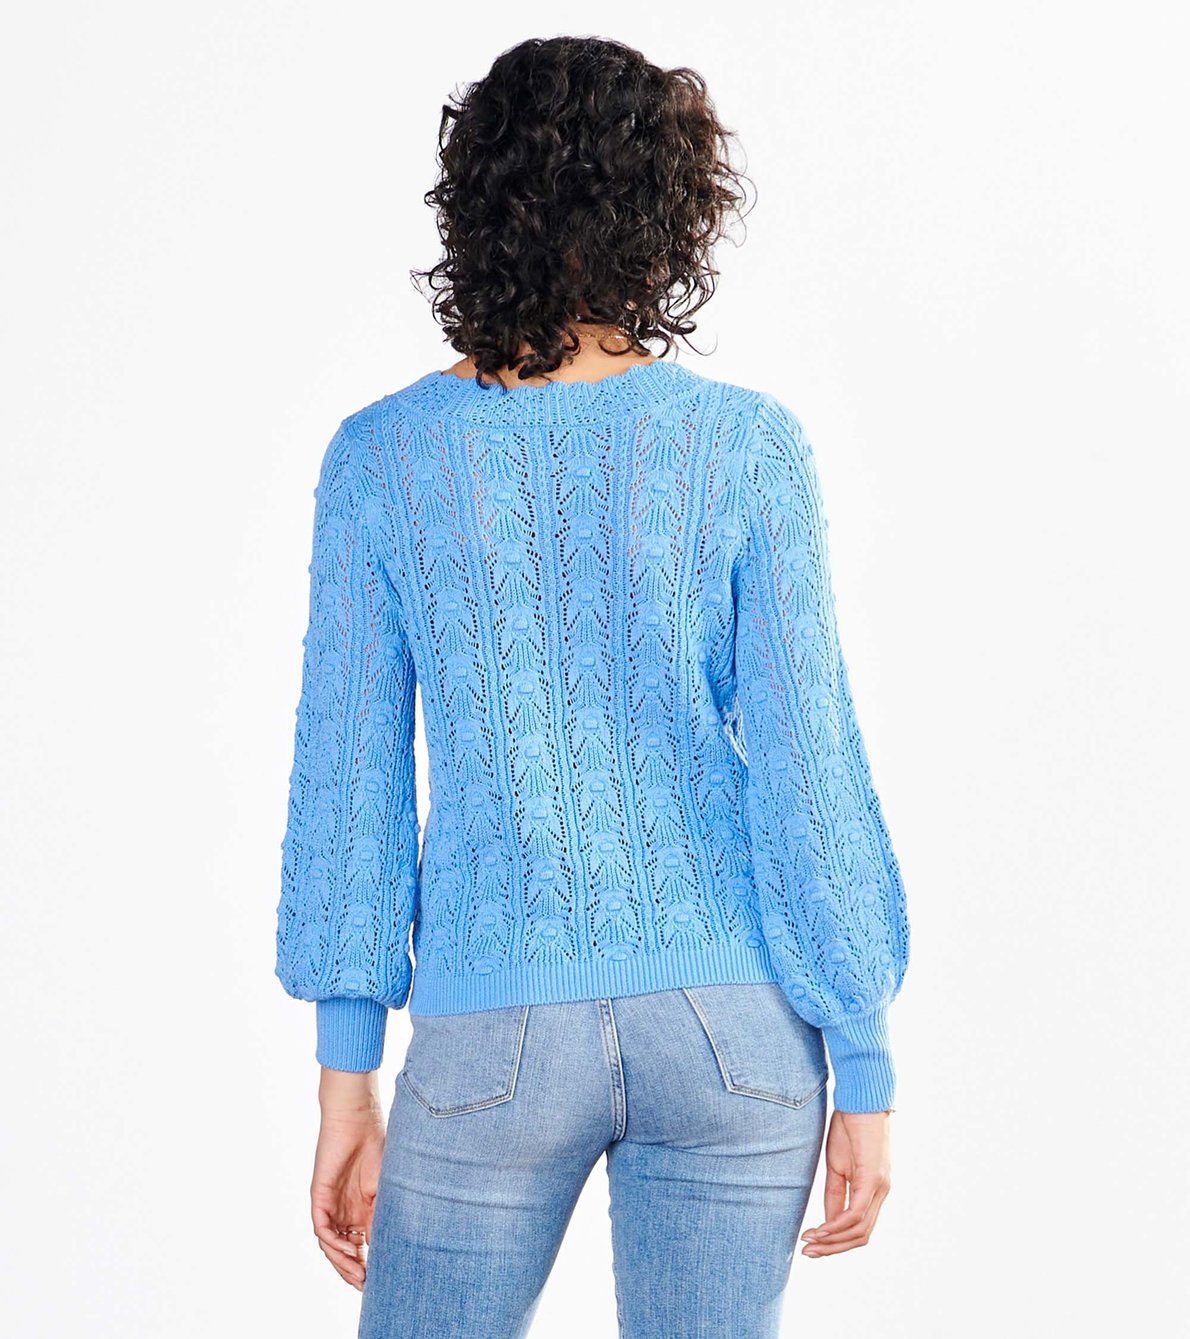 View larger image of Floral Pointelle Sweater - Azure